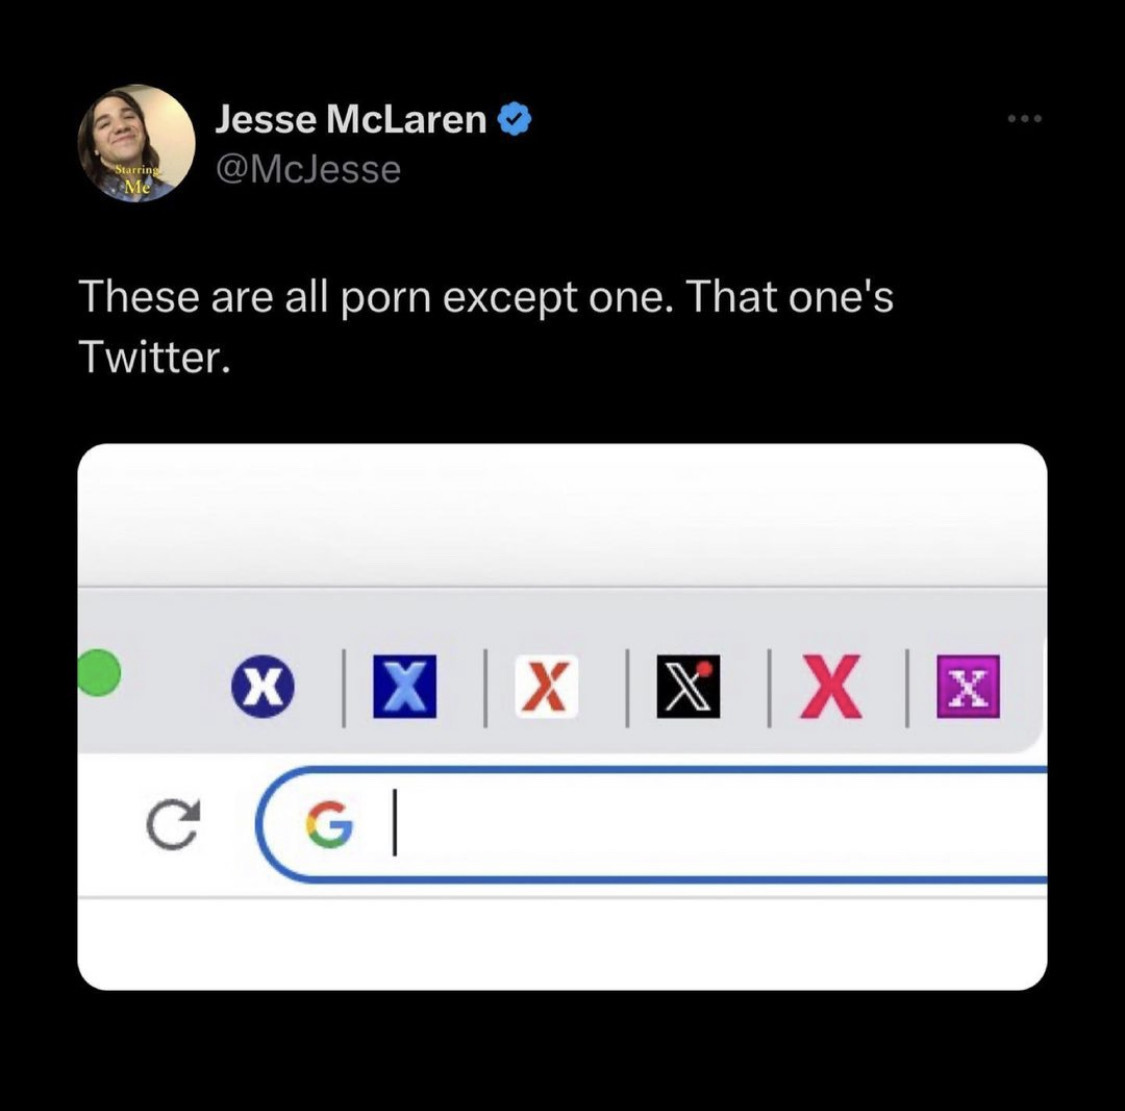 which is porn icon?